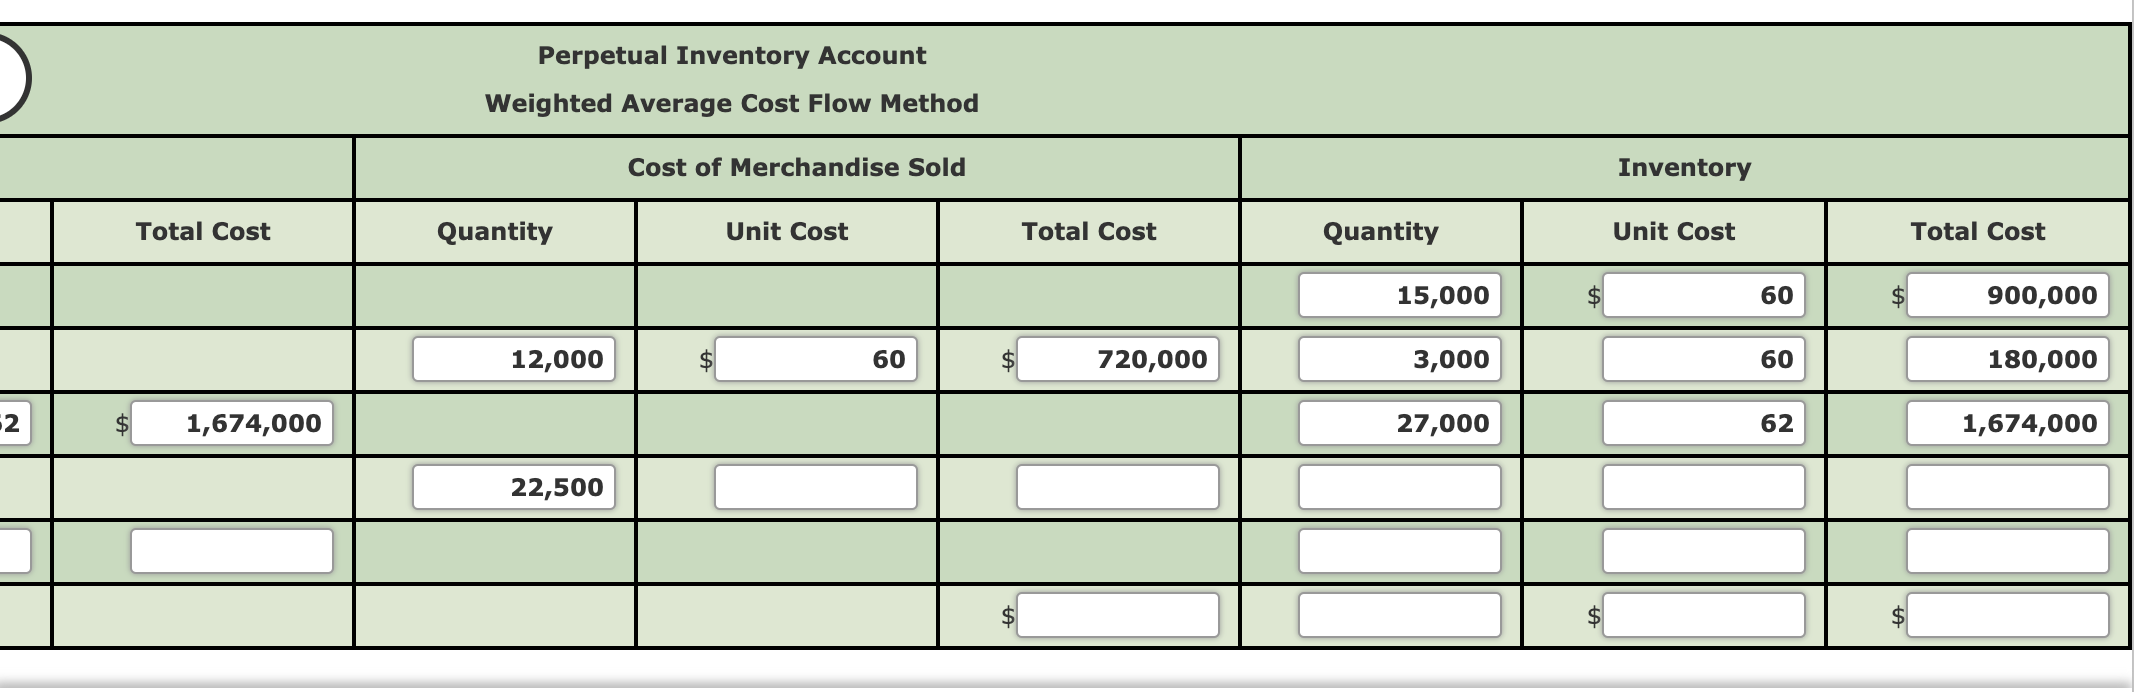 Inventory costing - Weighted Average, Perpetual 